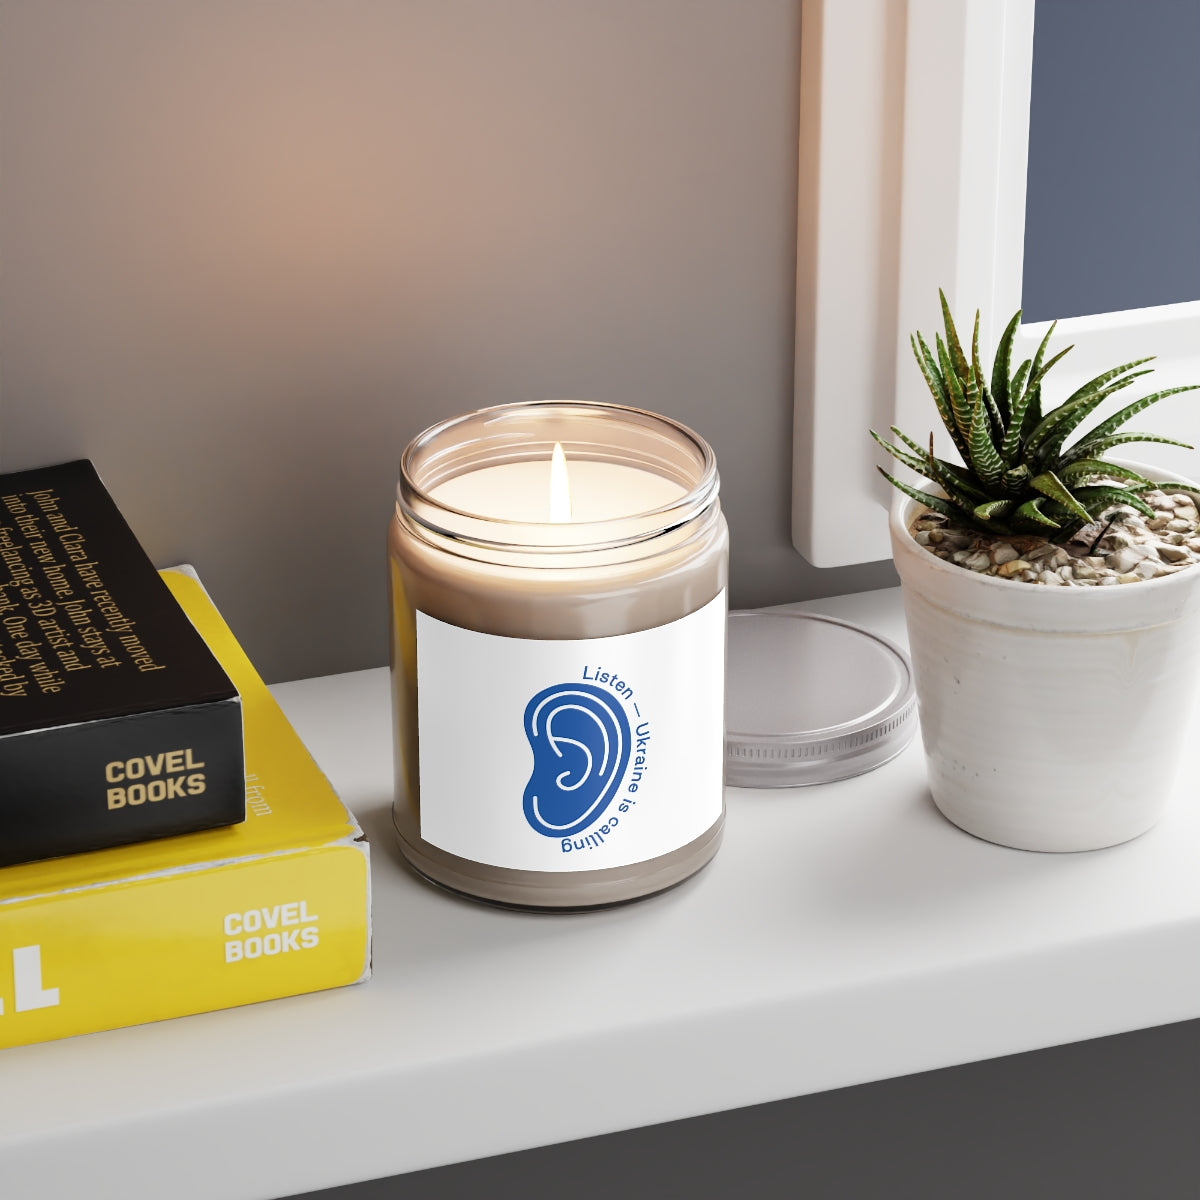 Listen To Ukraine's Call - 100% Ecological Soy Wax Scented Candle (lasts 50-60h)